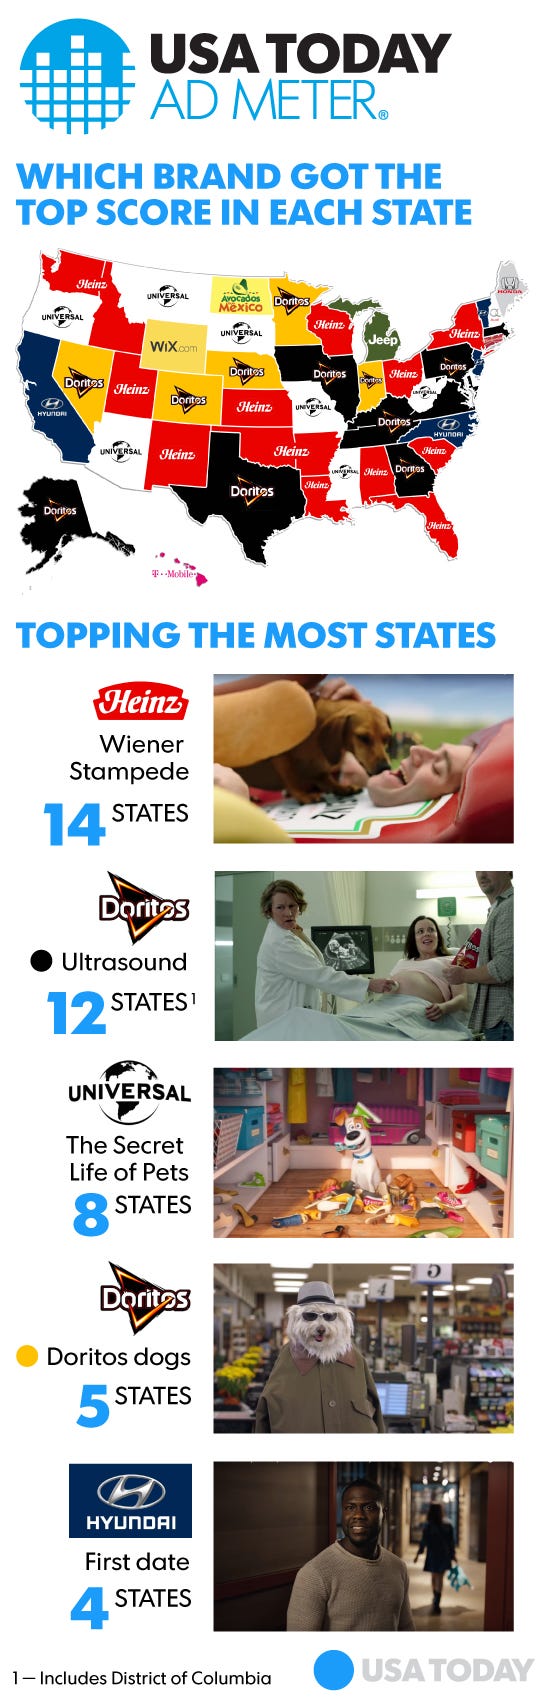 See California's top rated Super Bowl ads